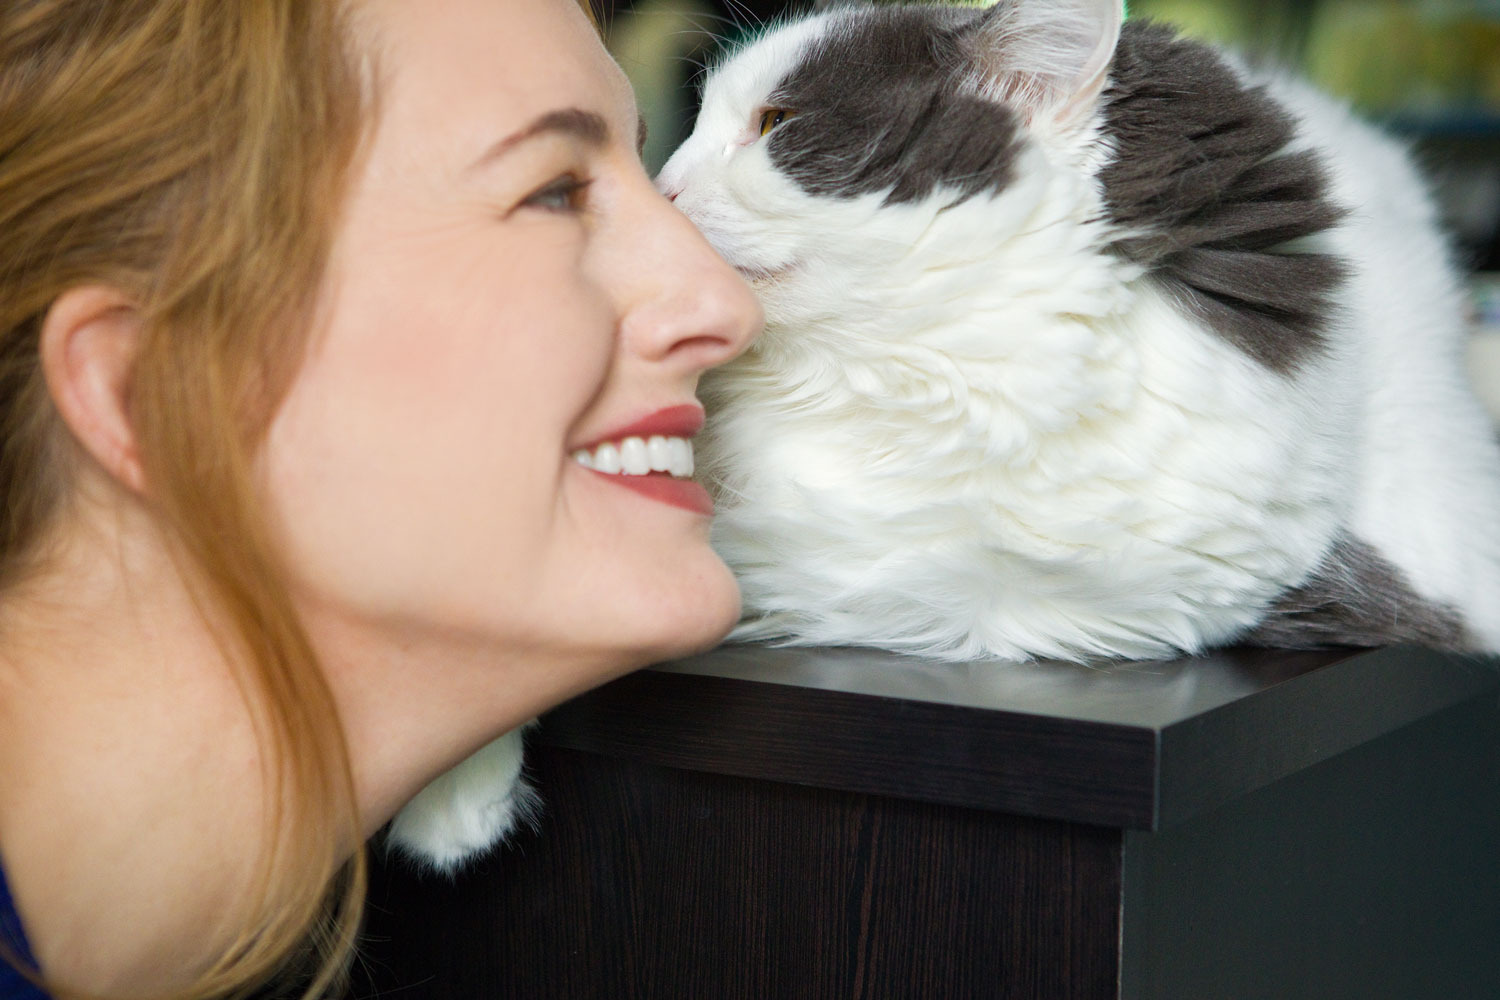 A beautiful bonding of a woman and her cat